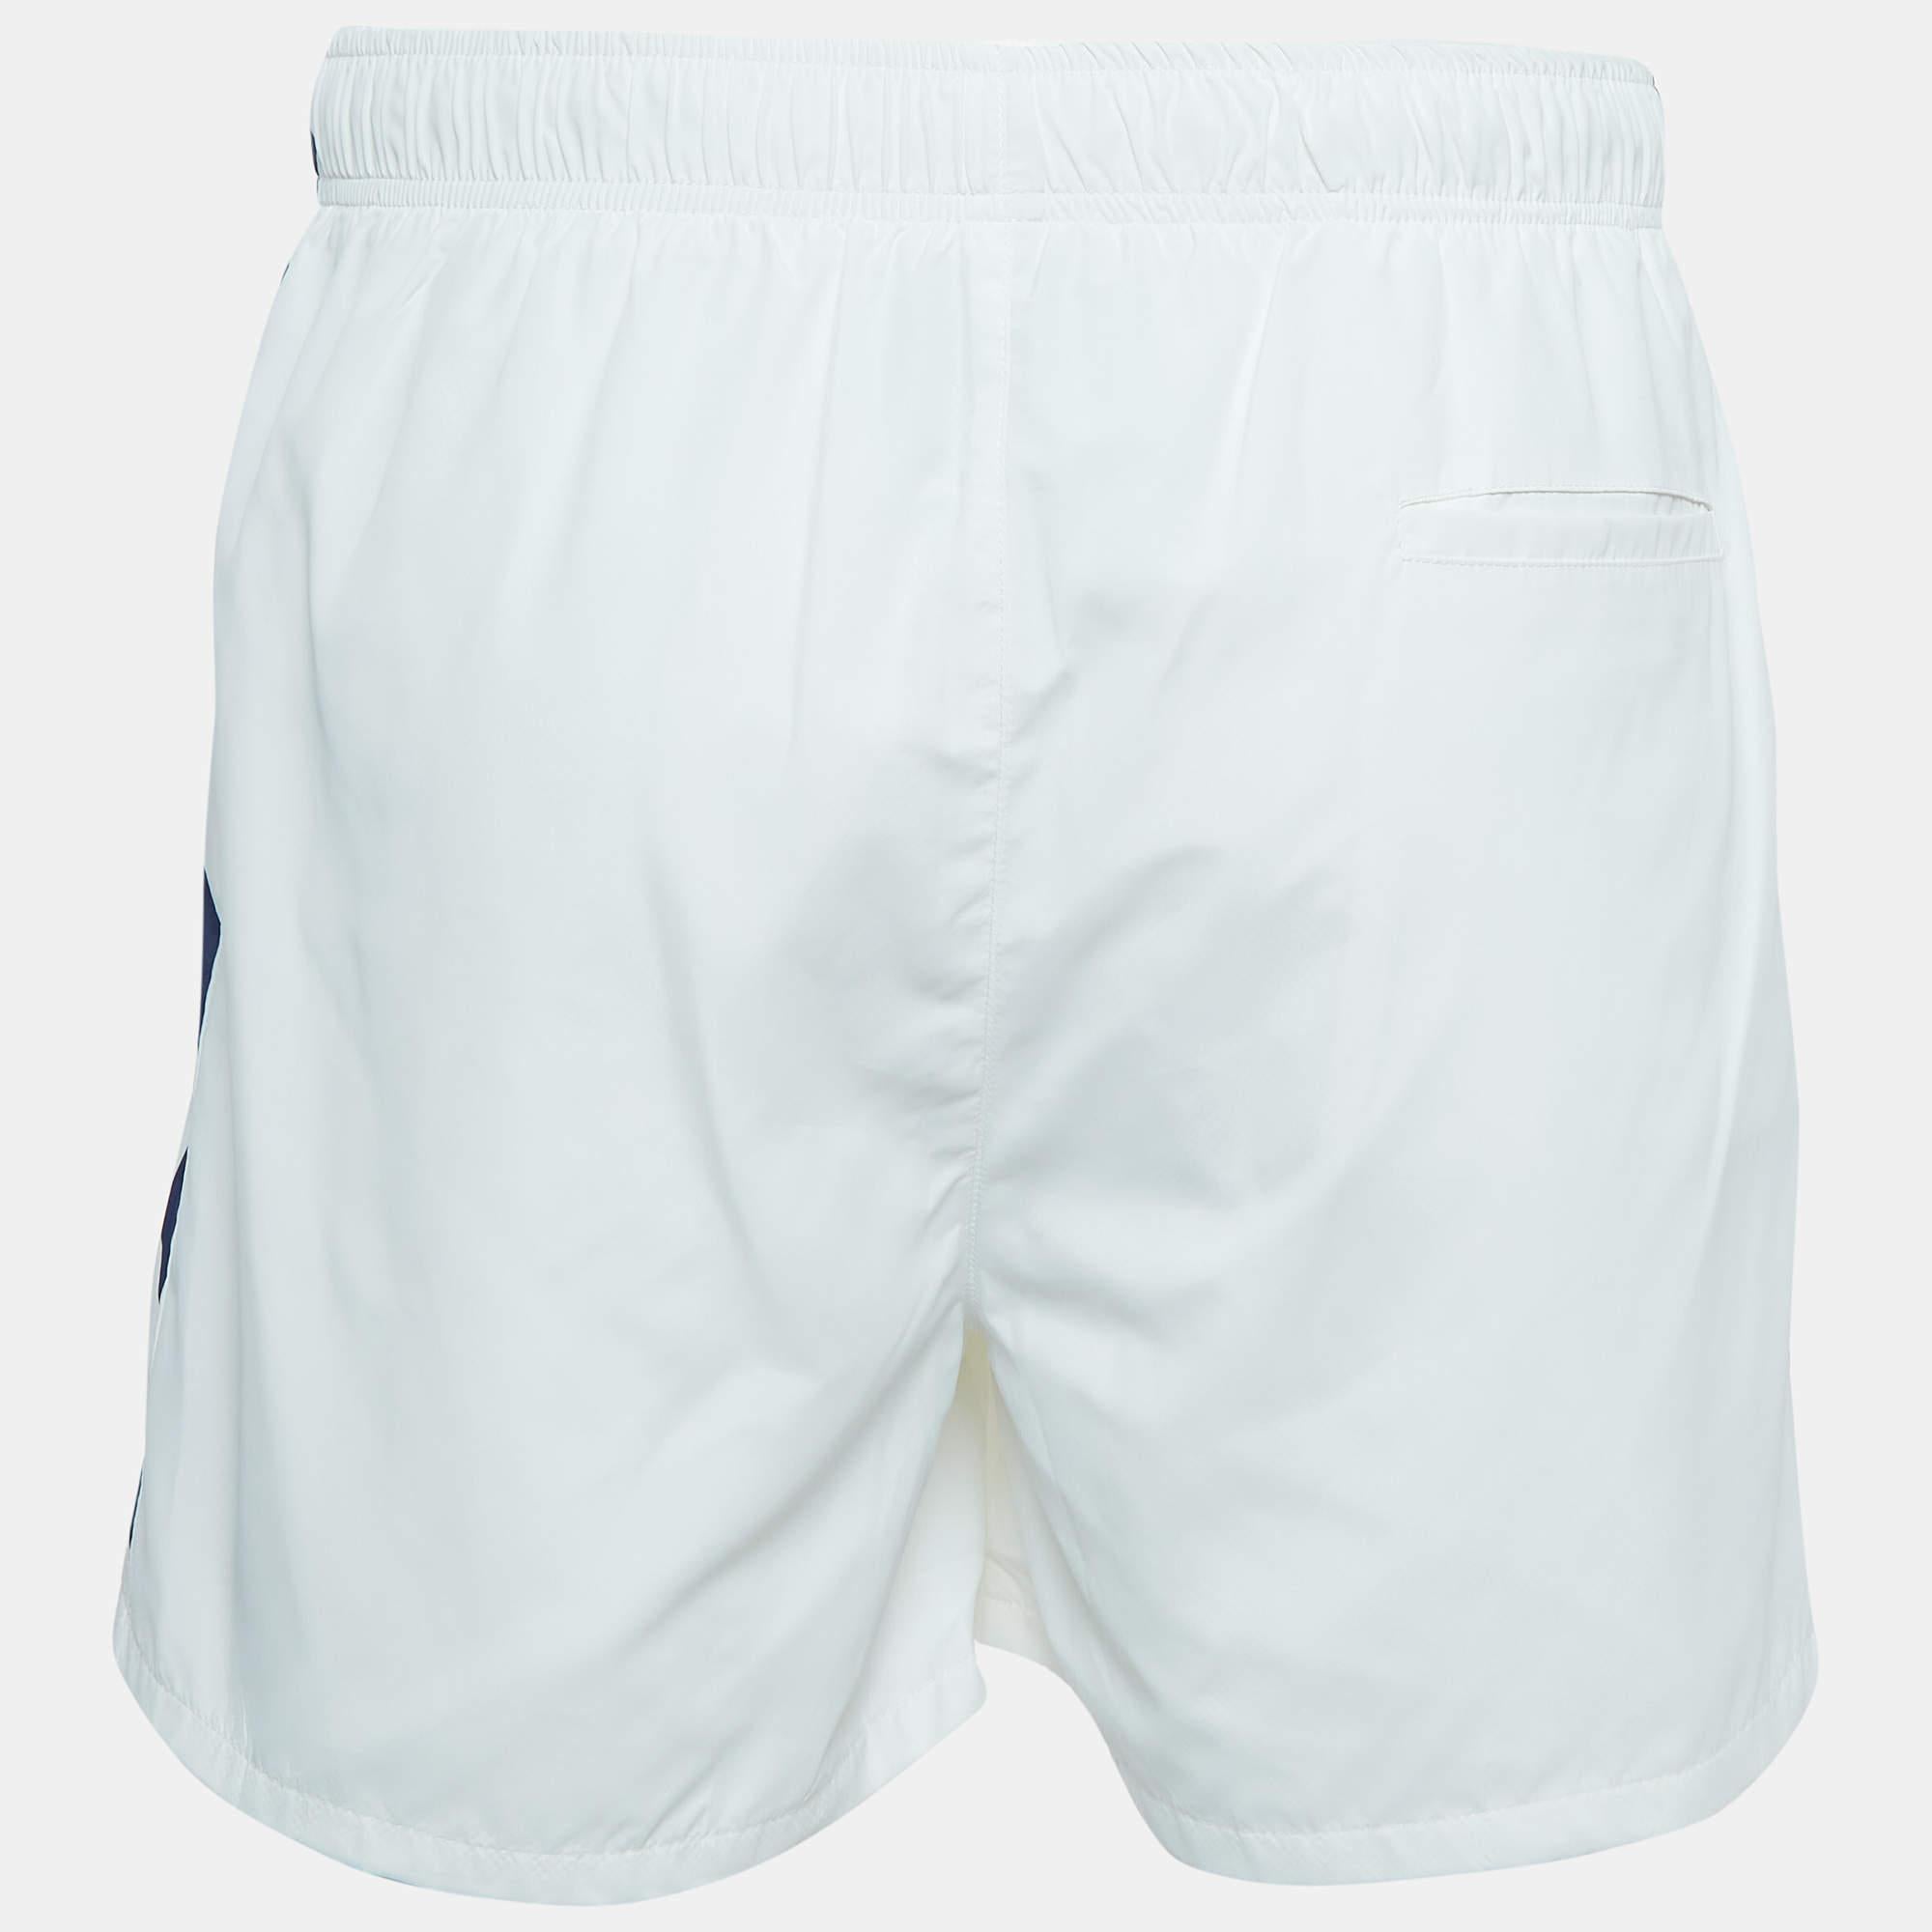 The Casablanca shorts offer a stylish and comfortable workout essential. Crafted from high-quality synthetic fabric, these shorts feature a crisp white hue with subtle prints, ensuring a trendy look. The design seamlessly blends fashion and